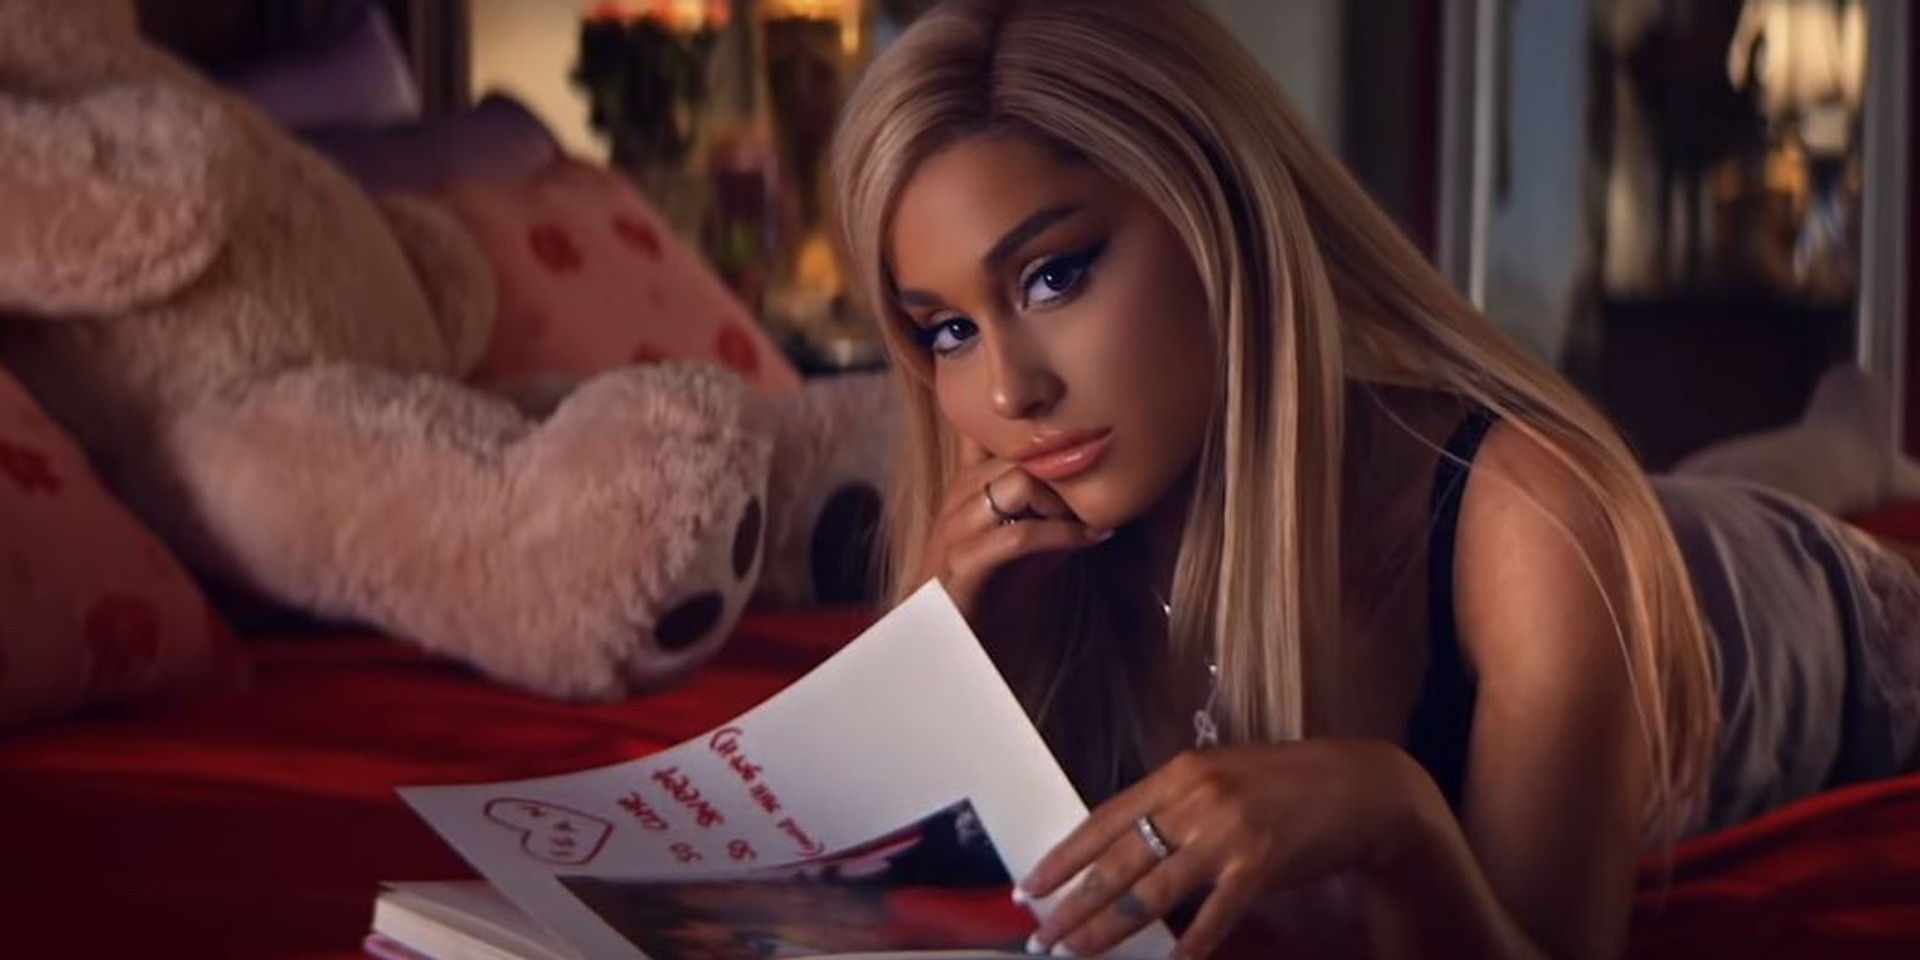 Ariana Grande recreates Mean Girls, Bring It On, and more with record-breaking 'thank u, next' music video – watch